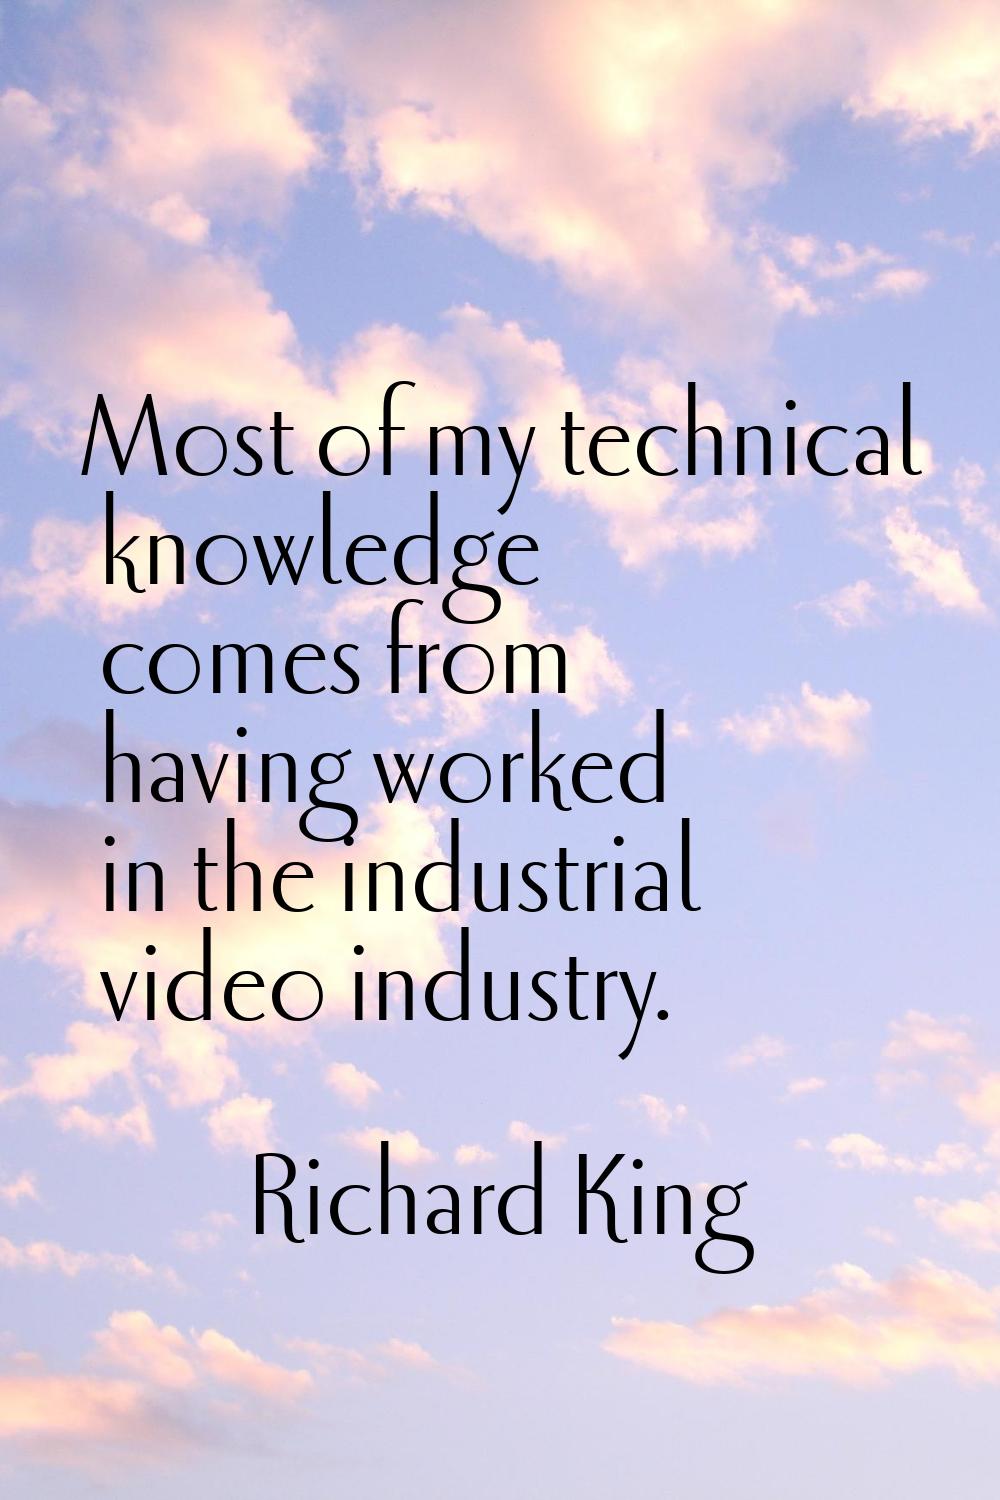 Most of my technical knowledge comes from having worked in the industrial video industry.